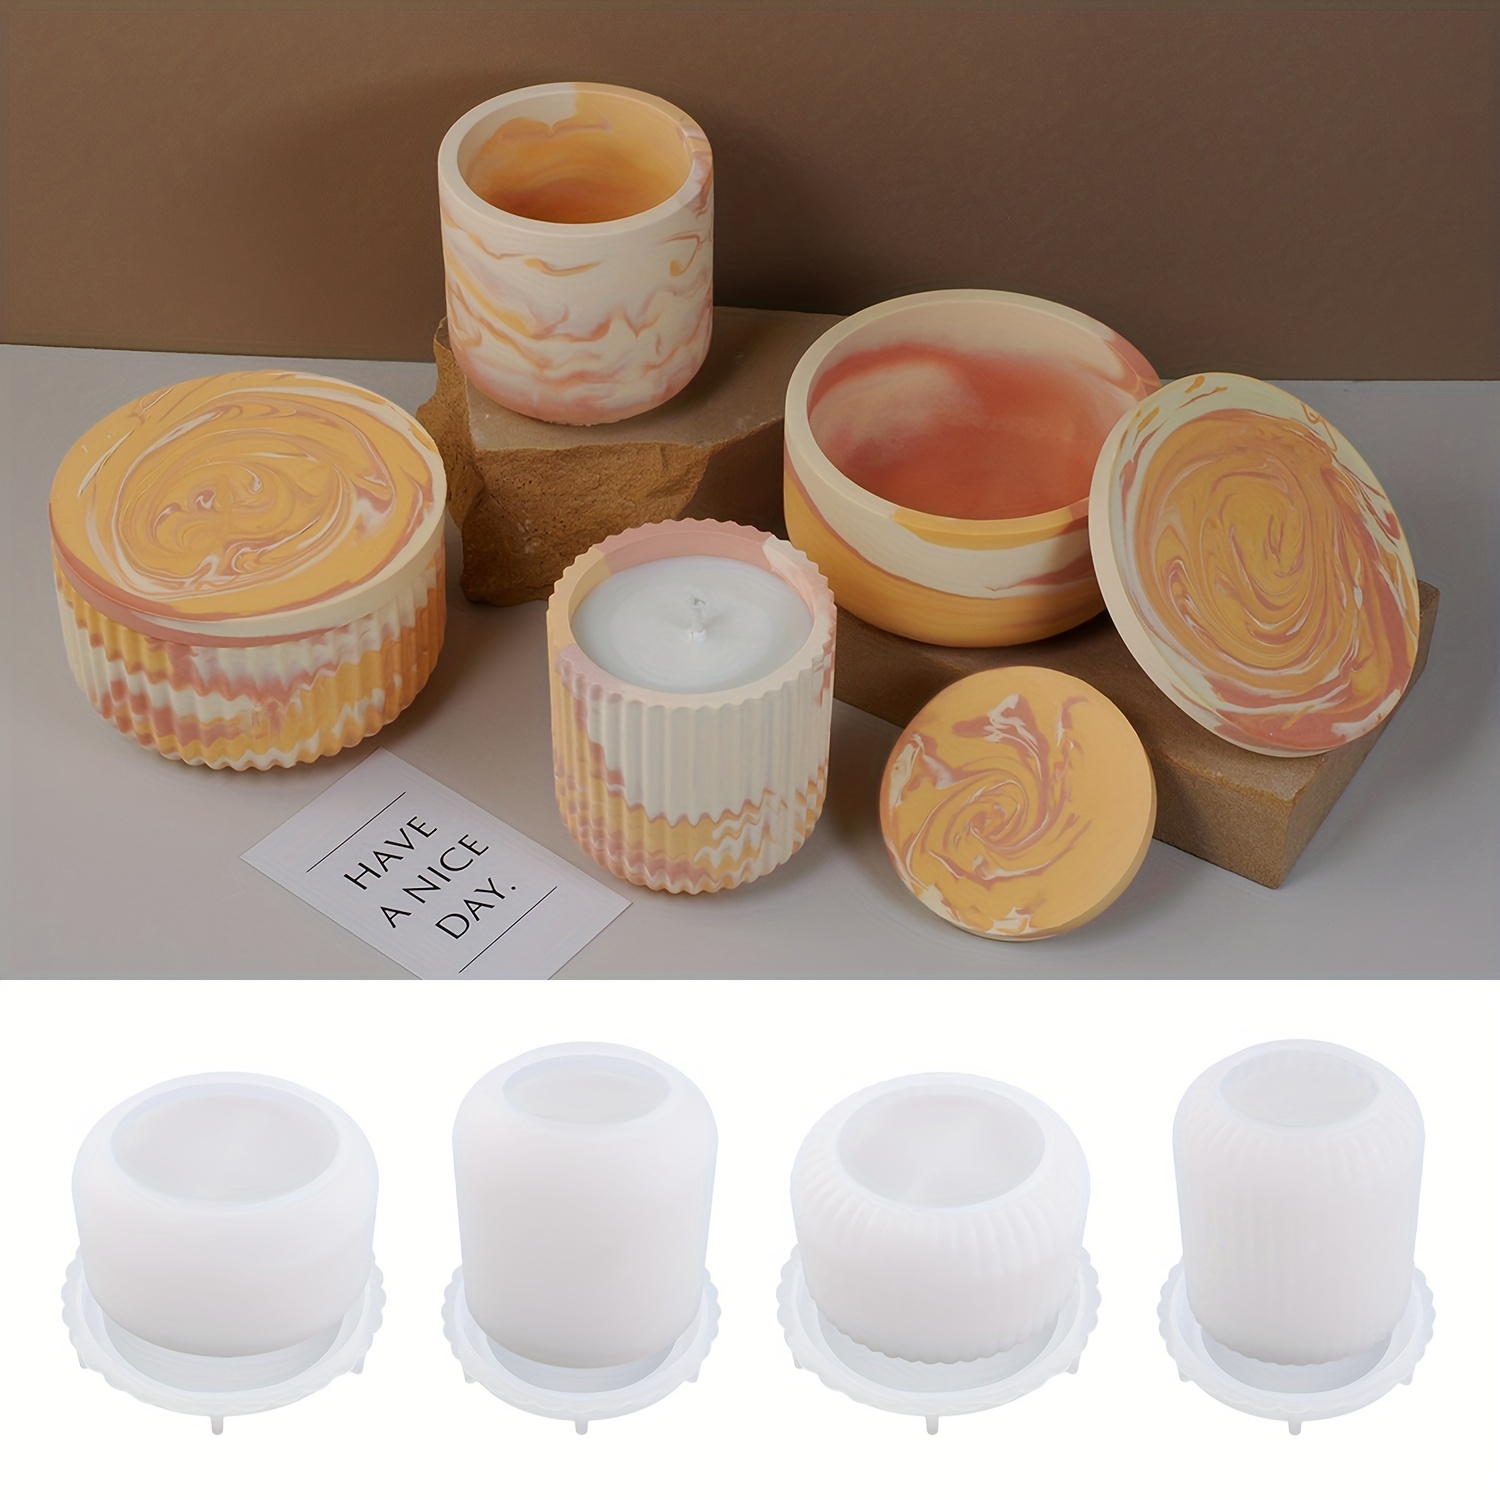 Silicone Mold for DIY Handmade Plaster Form Aroma Candle Cup Molds Mongolia  Cup Gypsum Cement Storage Jewelry Box Mould Supplies